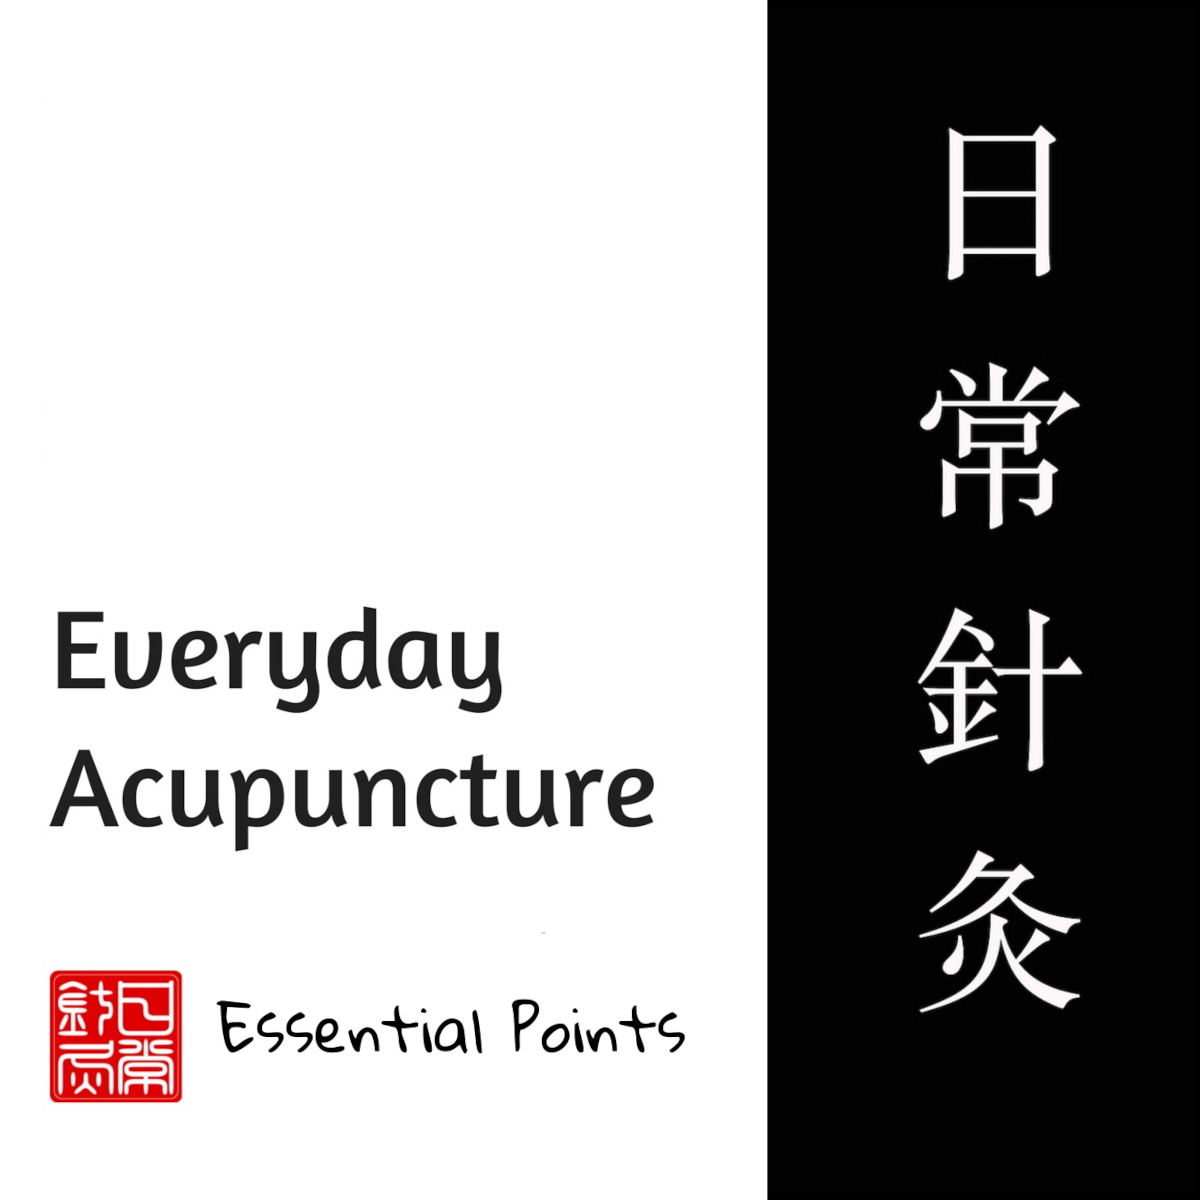 Can Acupuncture Help Me Quit Smoking Or Lose Weight? with Michael Max LAc., EAP093